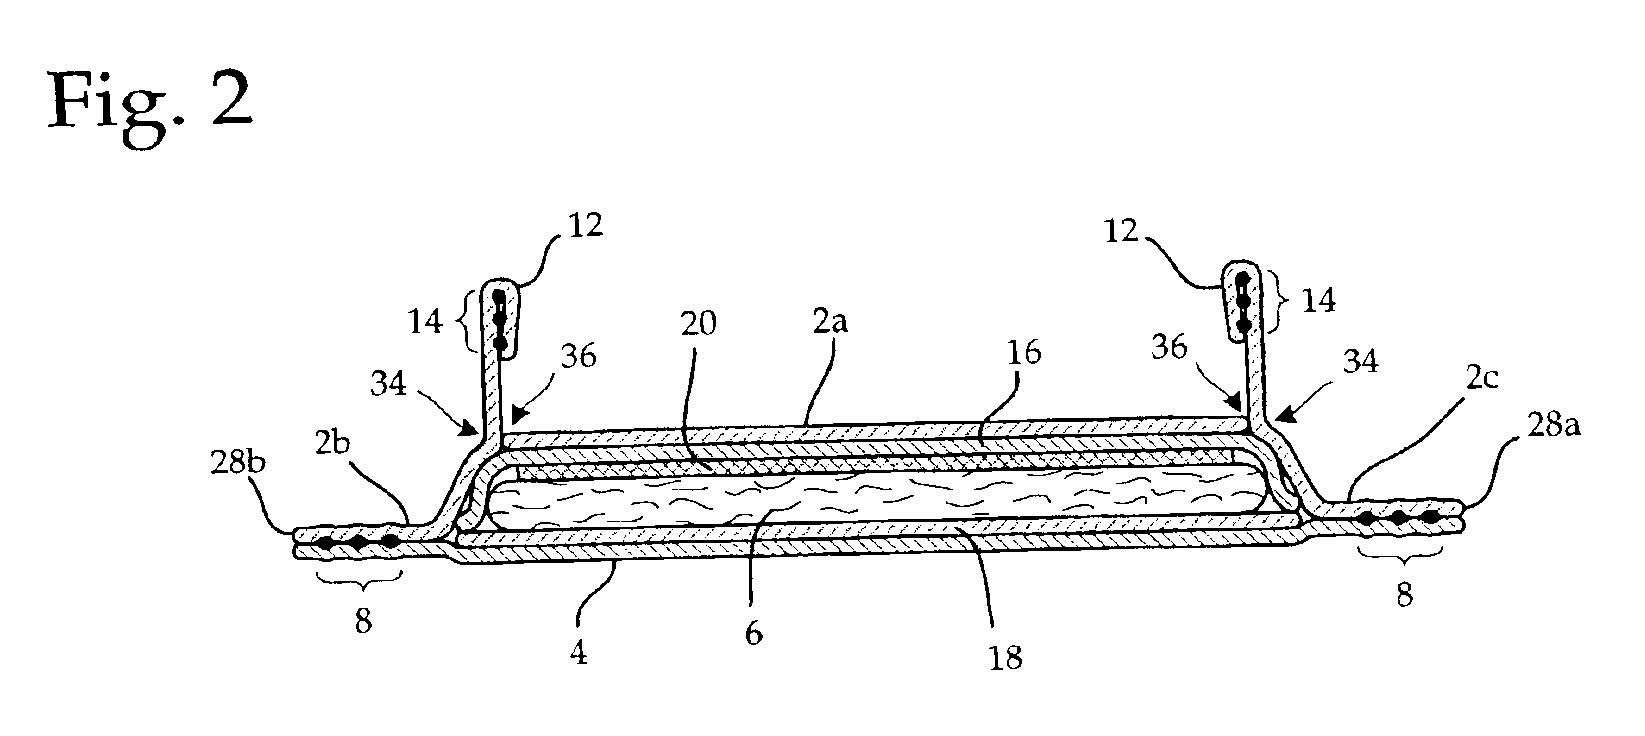 Method and apparatus for forming tow-based absorbent structures with a single casing sheet